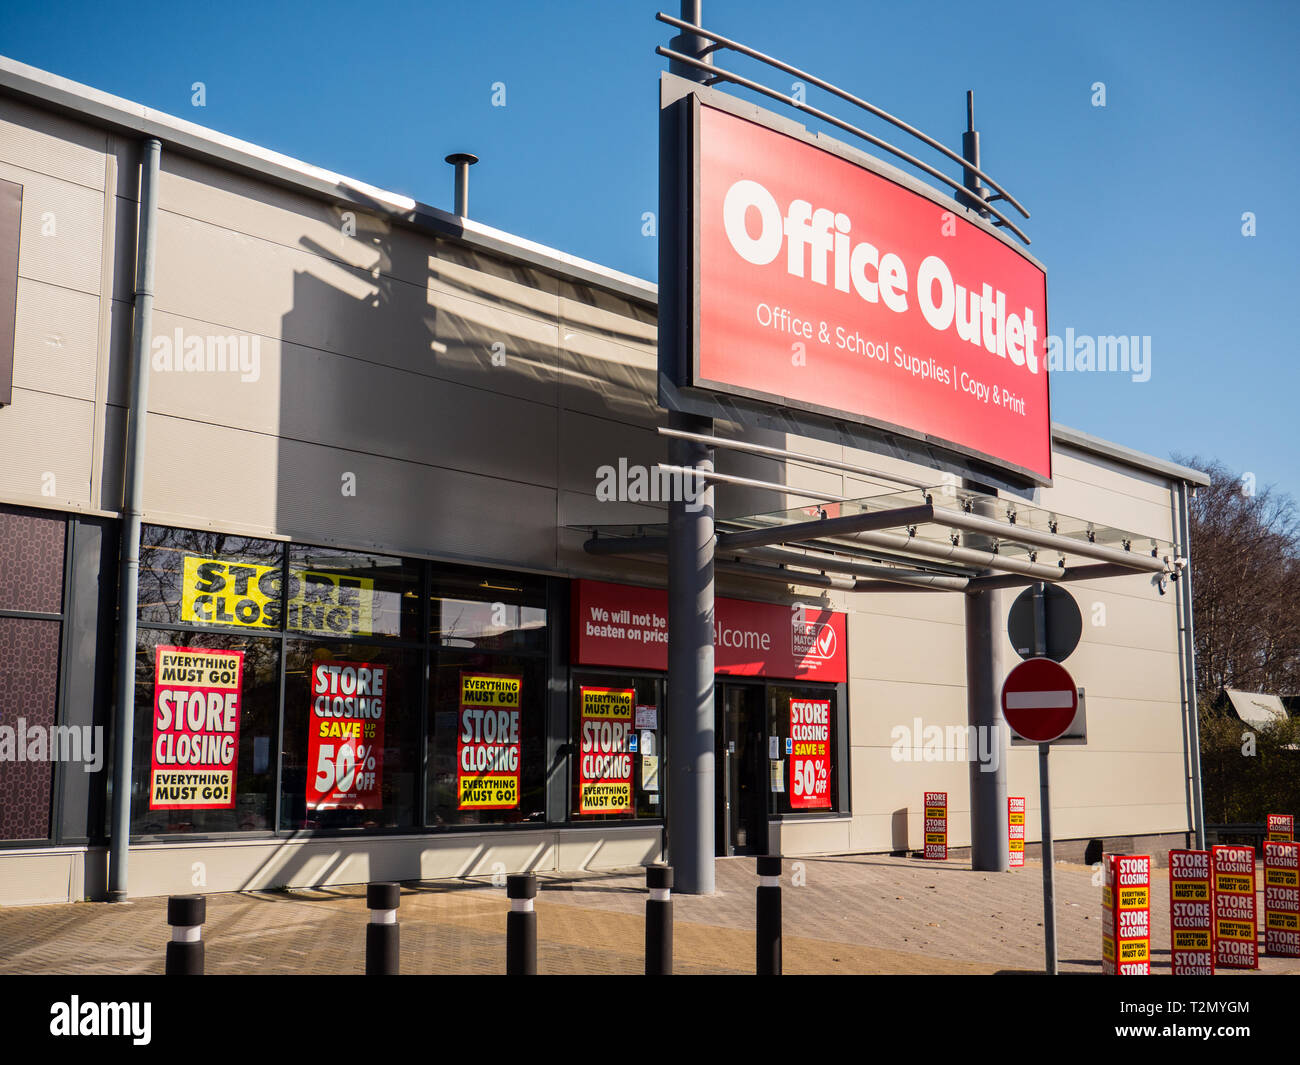 Office Outlet Store Closing Down, Forbury Retail Park, Reading Berkshire,  England, UK, GB Stock Photo - Alamy